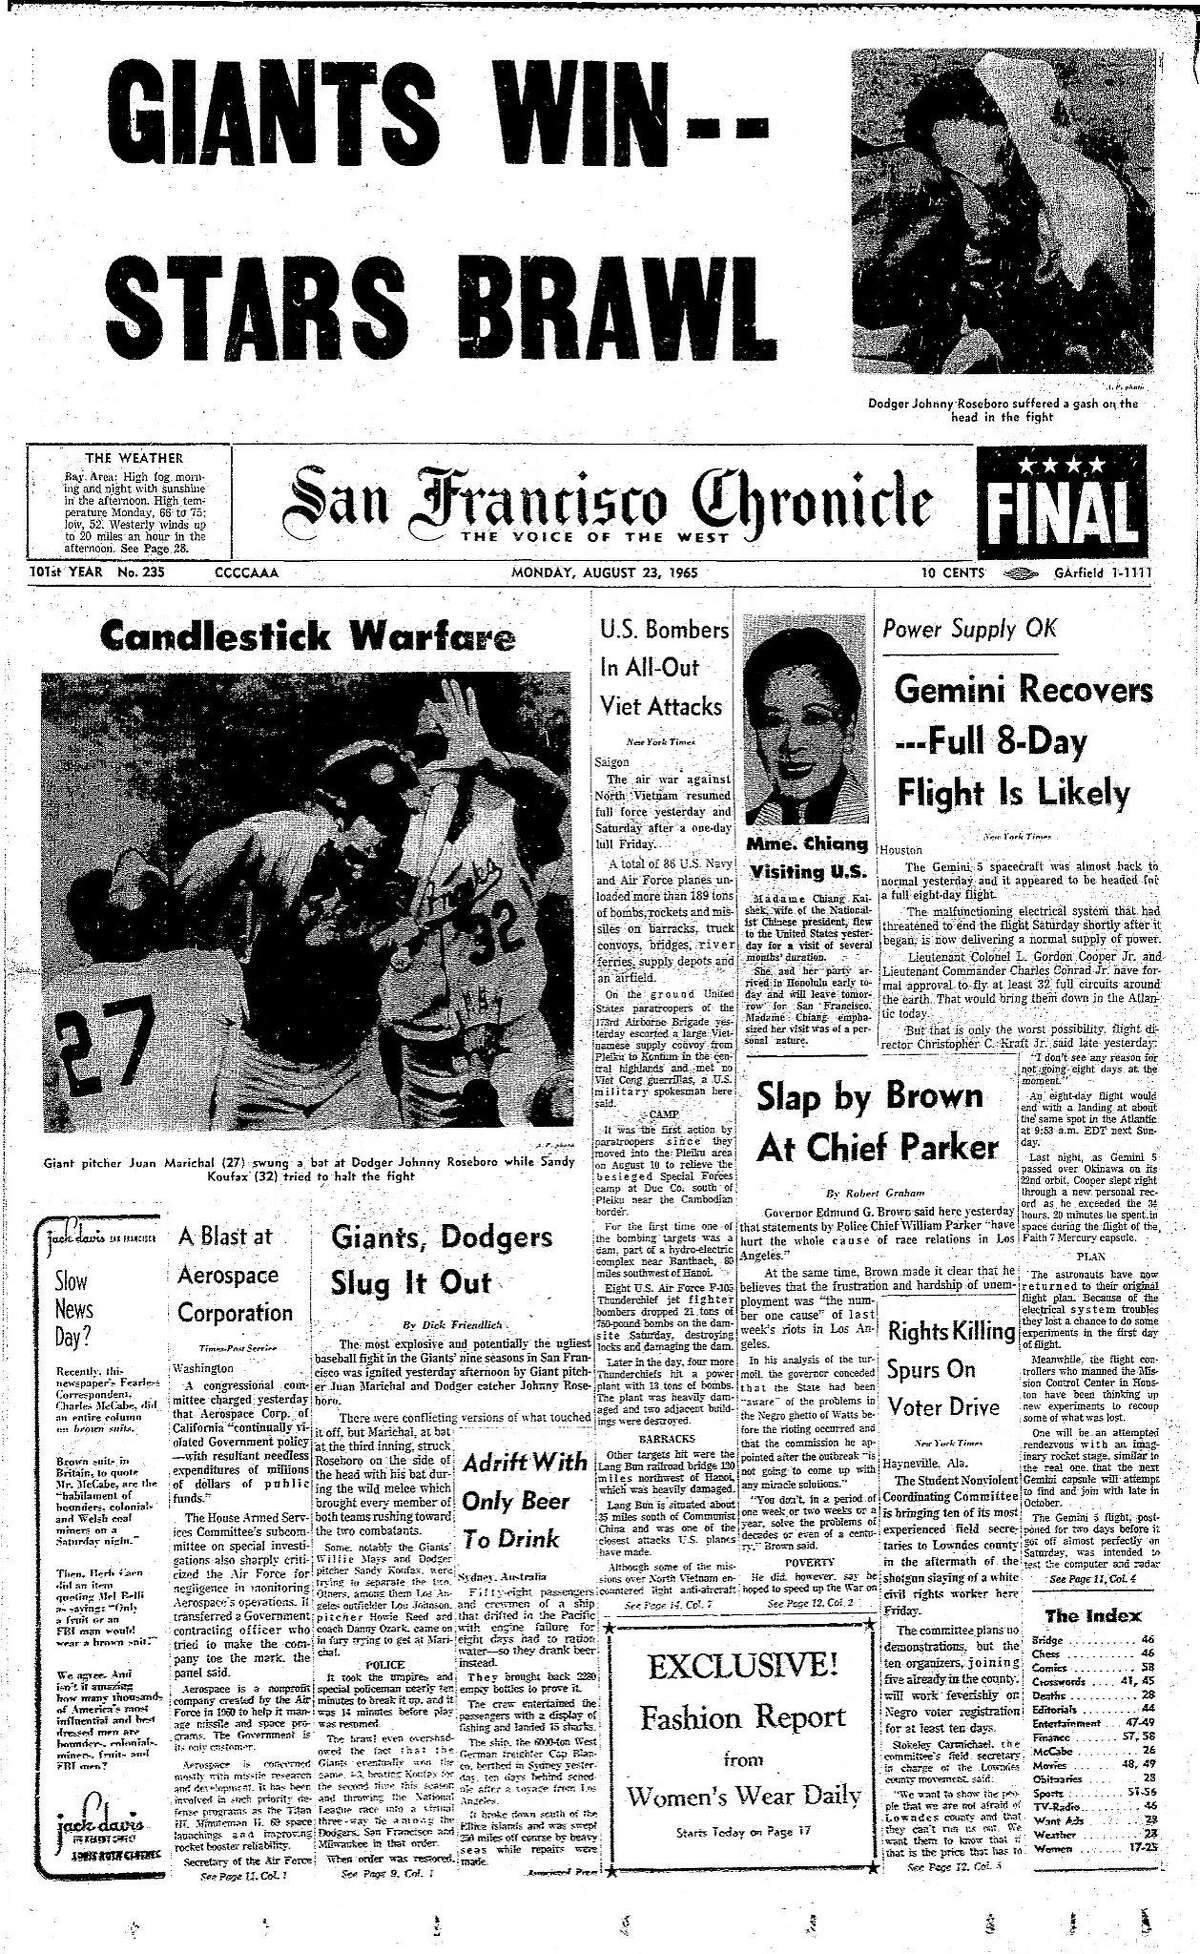 Historic Chronicle Front Page August 23, 1965 The Giants Juan Marichal and the Dodgers Johnny Roseboro would brawl, with Marichal striking Roseboro in the head Chron365, Chroncover